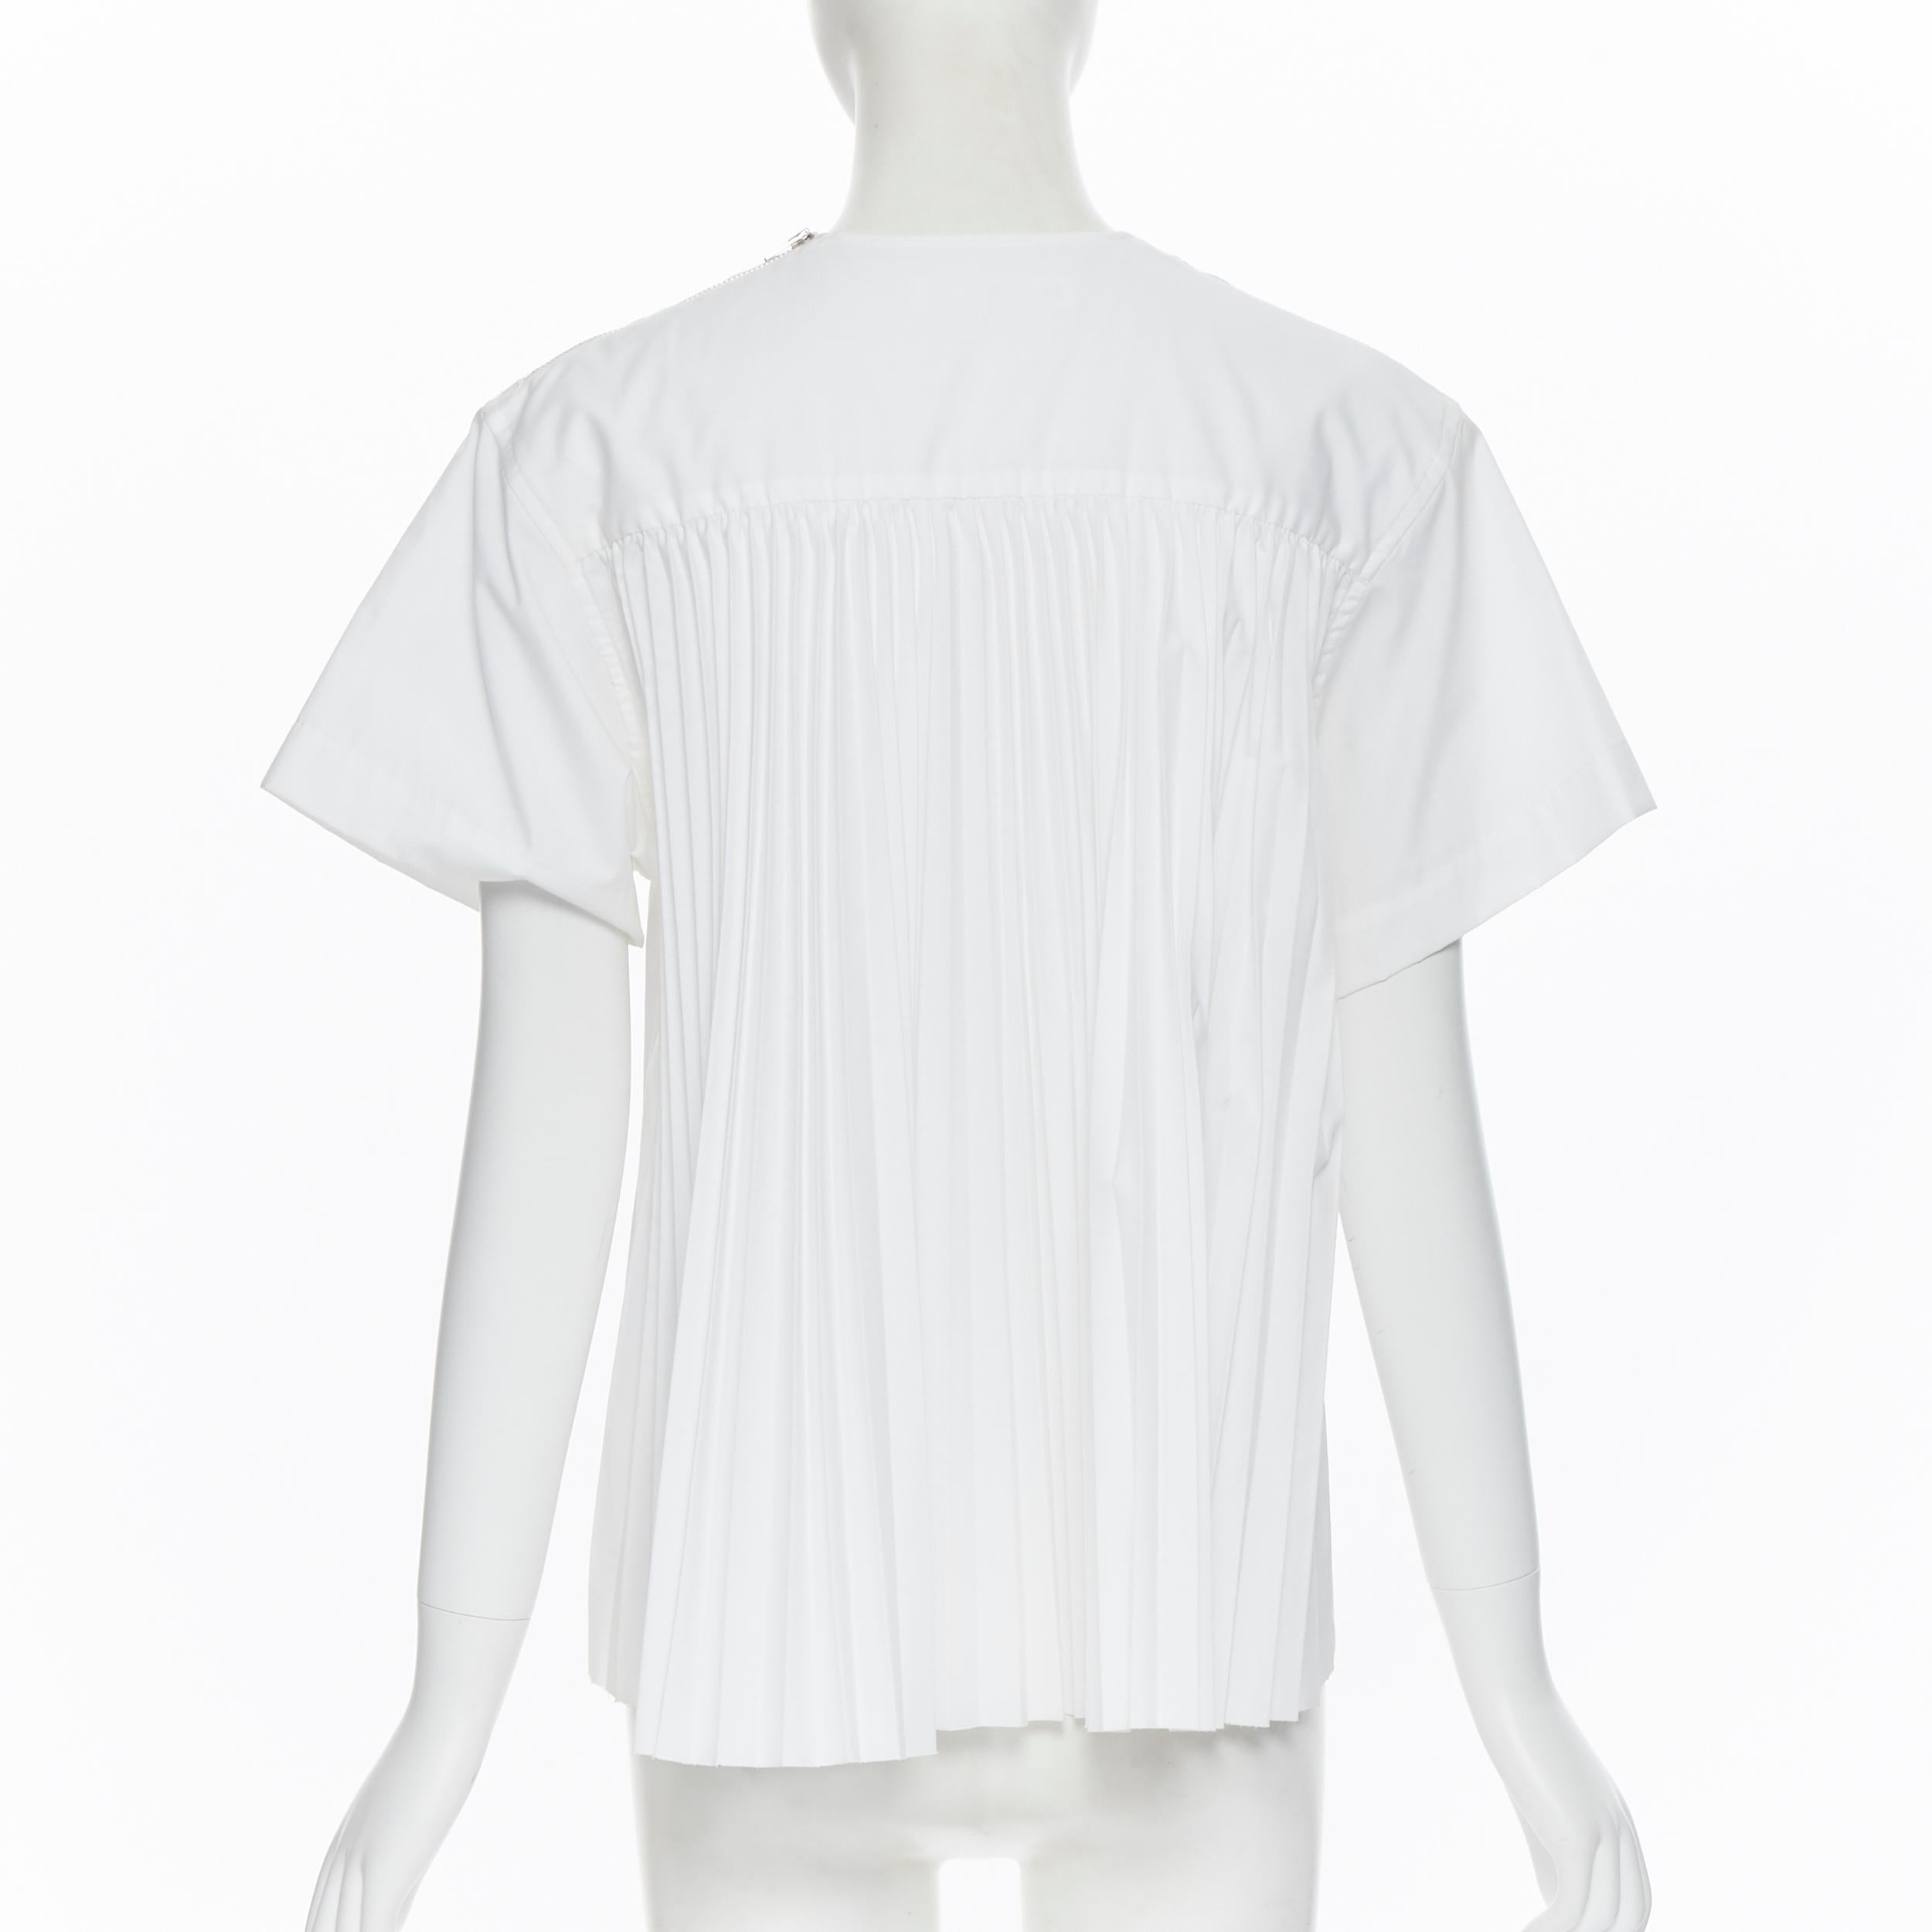 Women's SACAI LUCK white cotton pleated flared back short sleeve tshirt top JP1 S